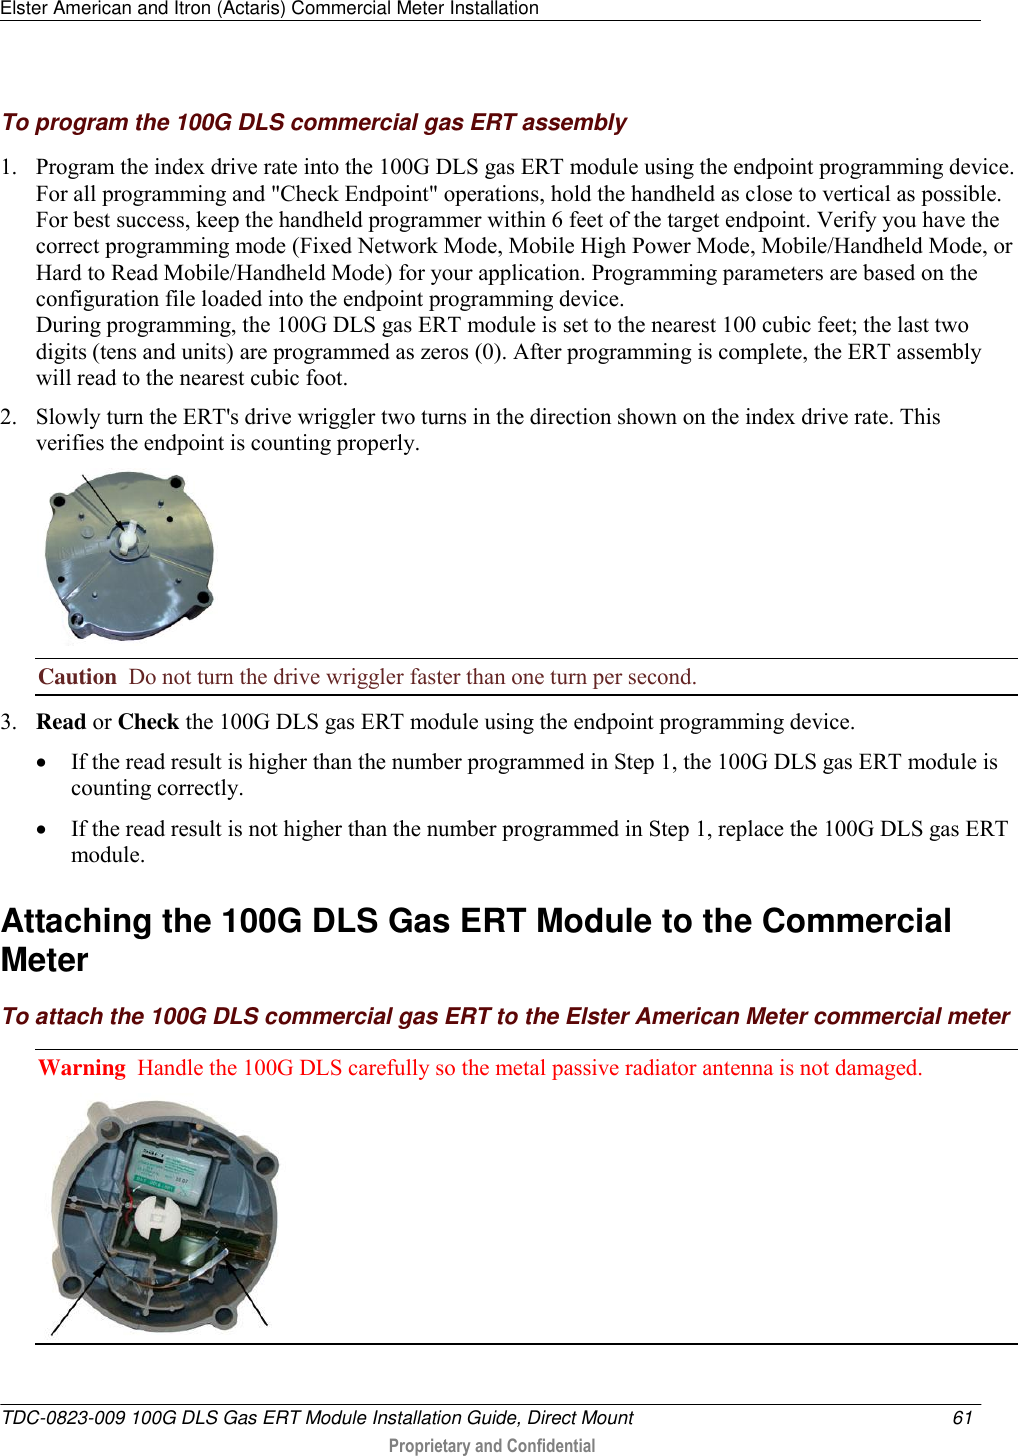 Elster American and Itron (Actaris) Commercial Meter Installation   TDC-0823-009 100G DLS Gas ERT Module Installation Guide, Direct Mount  61   Proprietary and Confidential     To program the 100G DLS commercial gas ERT assembly 1. Program the index drive rate into the 100G DLS gas ERT module using the endpoint programming device. For all programming and &quot;Check Endpoint&quot; operations, hold the handheld as close to vertical as possible. For best success, keep the handheld programmer within 6 feet of the target endpoint. Verify you have the correct programming mode (Fixed Network Mode, Mobile High Power Mode, Mobile/Handheld Mode, or Hard to Read Mobile/Handheld Mode) for your application. Programming parameters are based on the configuration file loaded into the endpoint programming device.  During programming, the 100G DLS gas ERT module is set to the nearest 100 cubic feet; the last two digits (tens and units) are programmed as zeros (0). After programming is complete, the ERT assembly will read to the nearest cubic foot.  2. Slowly turn the ERT&apos;s drive wriggler two turns in the direction shown on the index drive rate. This verifies the endpoint is counting properly.  Caution  Do not turn the drive wriggler faster than one turn per second.  3. Read or Check the 100G DLS gas ERT module using the endpoint programming device.   If the read result is higher than the number programmed in Step 1, the 100G DLS gas ERT module is counting correctly.   If the read result is not higher than the number programmed in Step 1, replace the 100G DLS gas ERT module.  Attaching the 100G DLS Gas ERT Module to the Commercial Meter To attach the 100G DLS commercial gas ERT to the Elster American Meter commercial meter Warning  Handle the 100G DLS carefully so the metal passive radiator antenna is not damaged.  